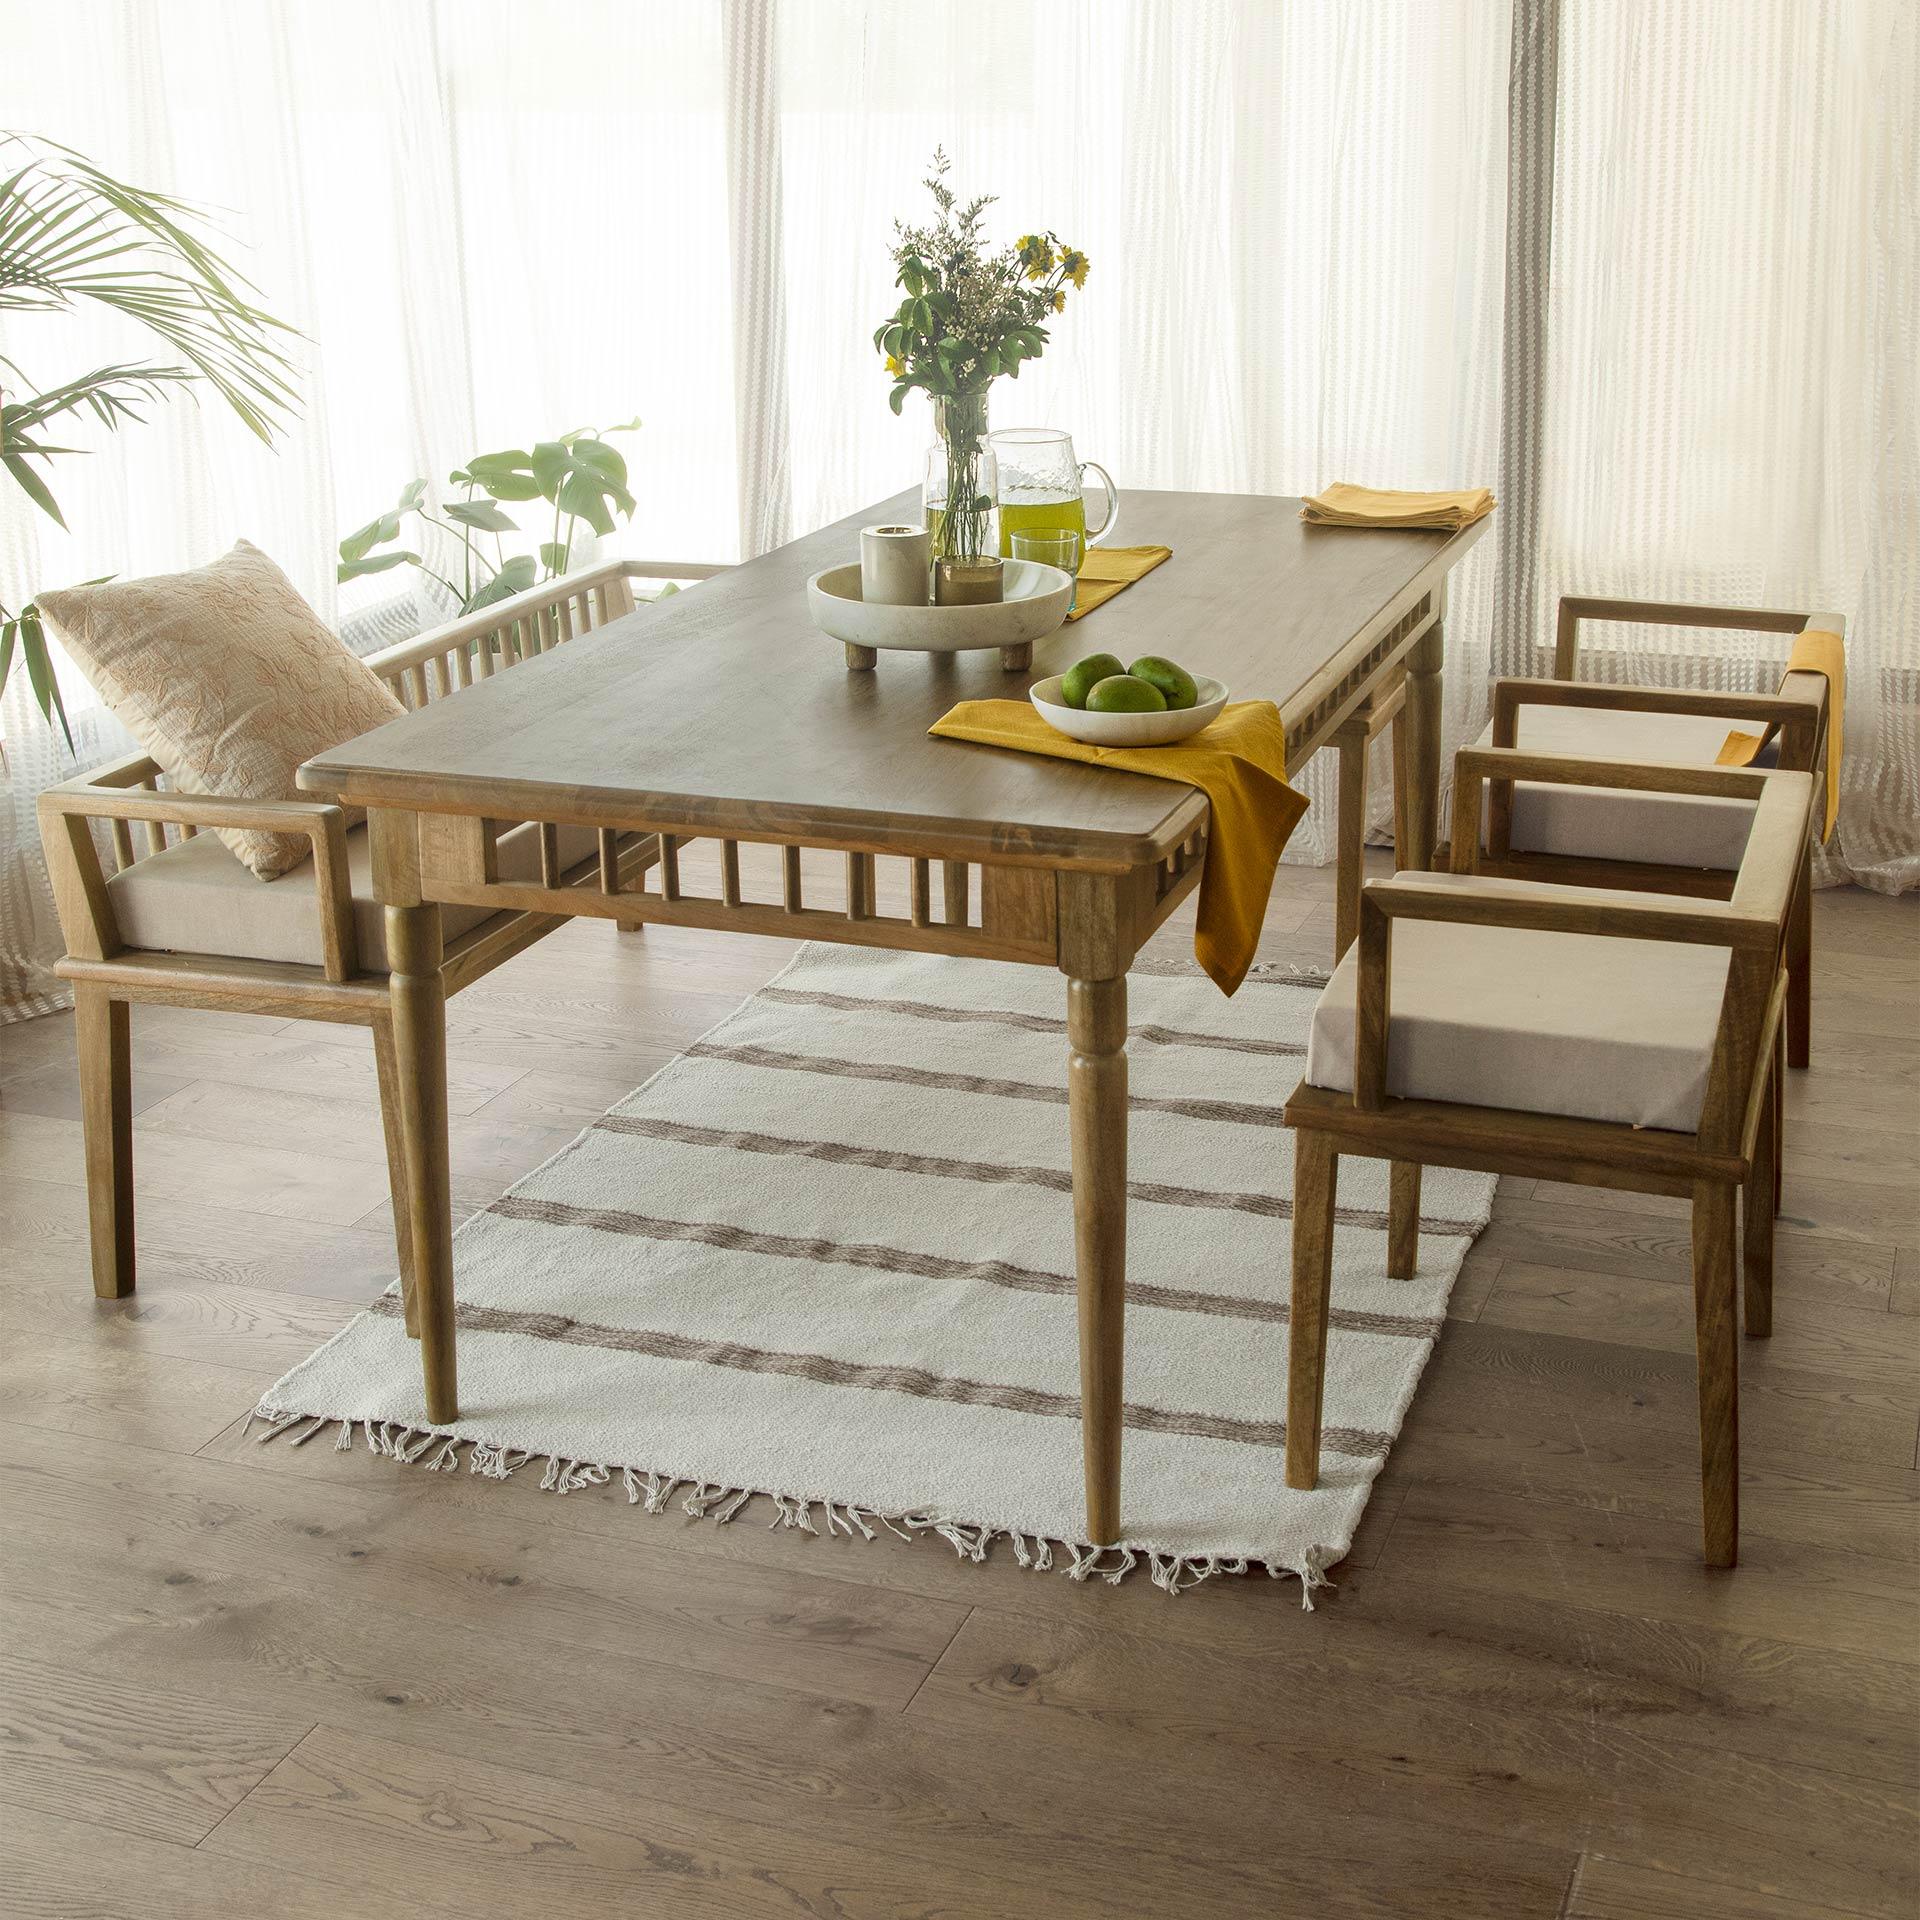 Lei pan ready-to-assemble dining table